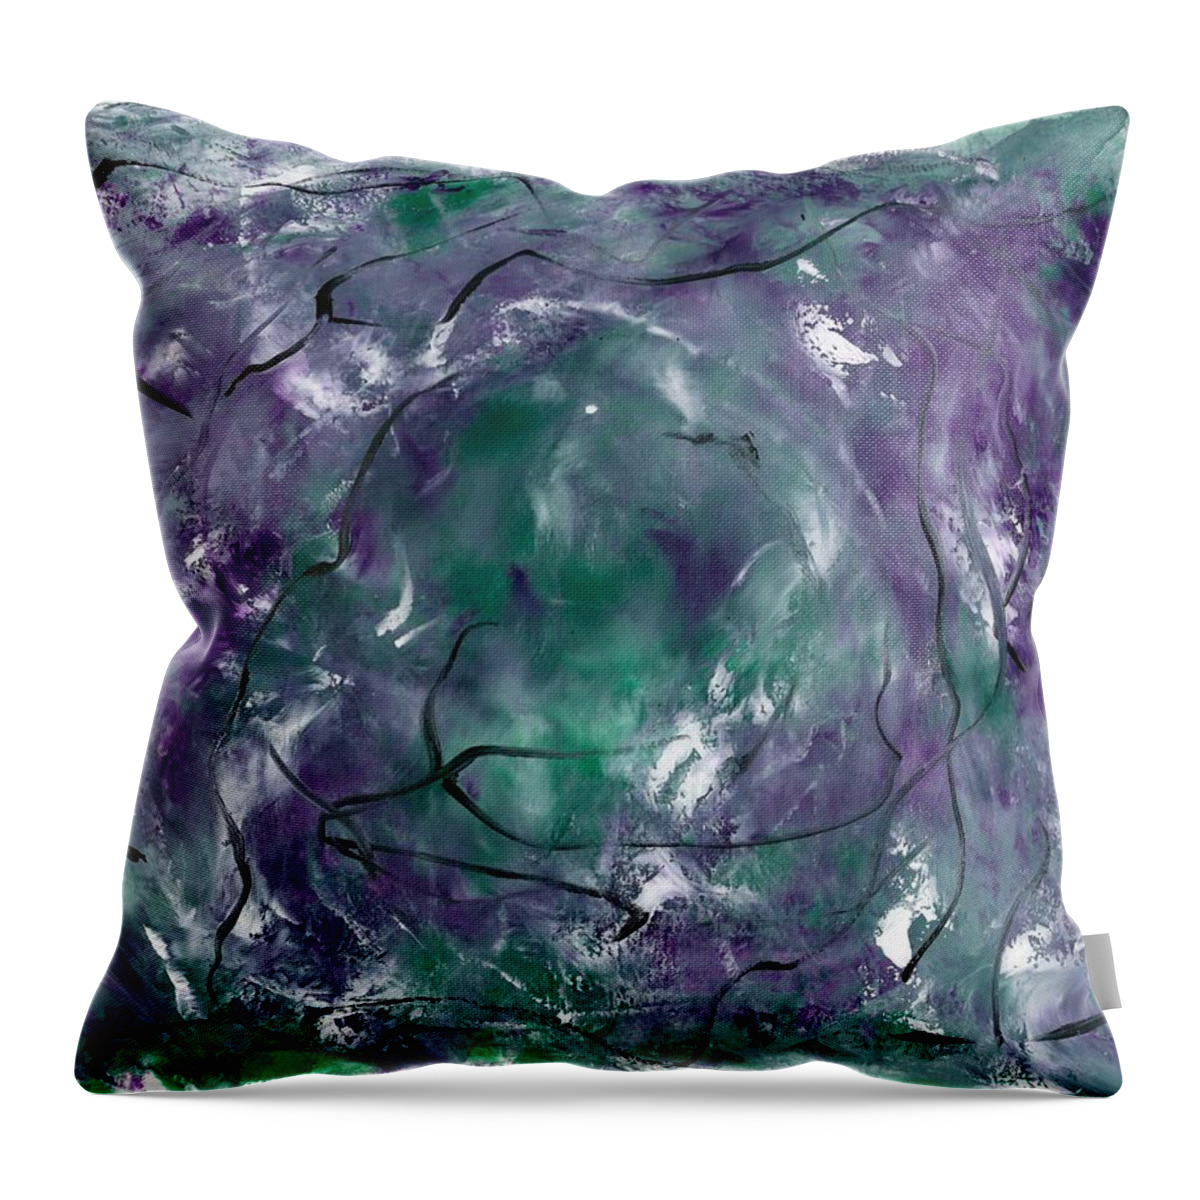  Throw Pillow featuring the painting Extravagant One by Monica Martin